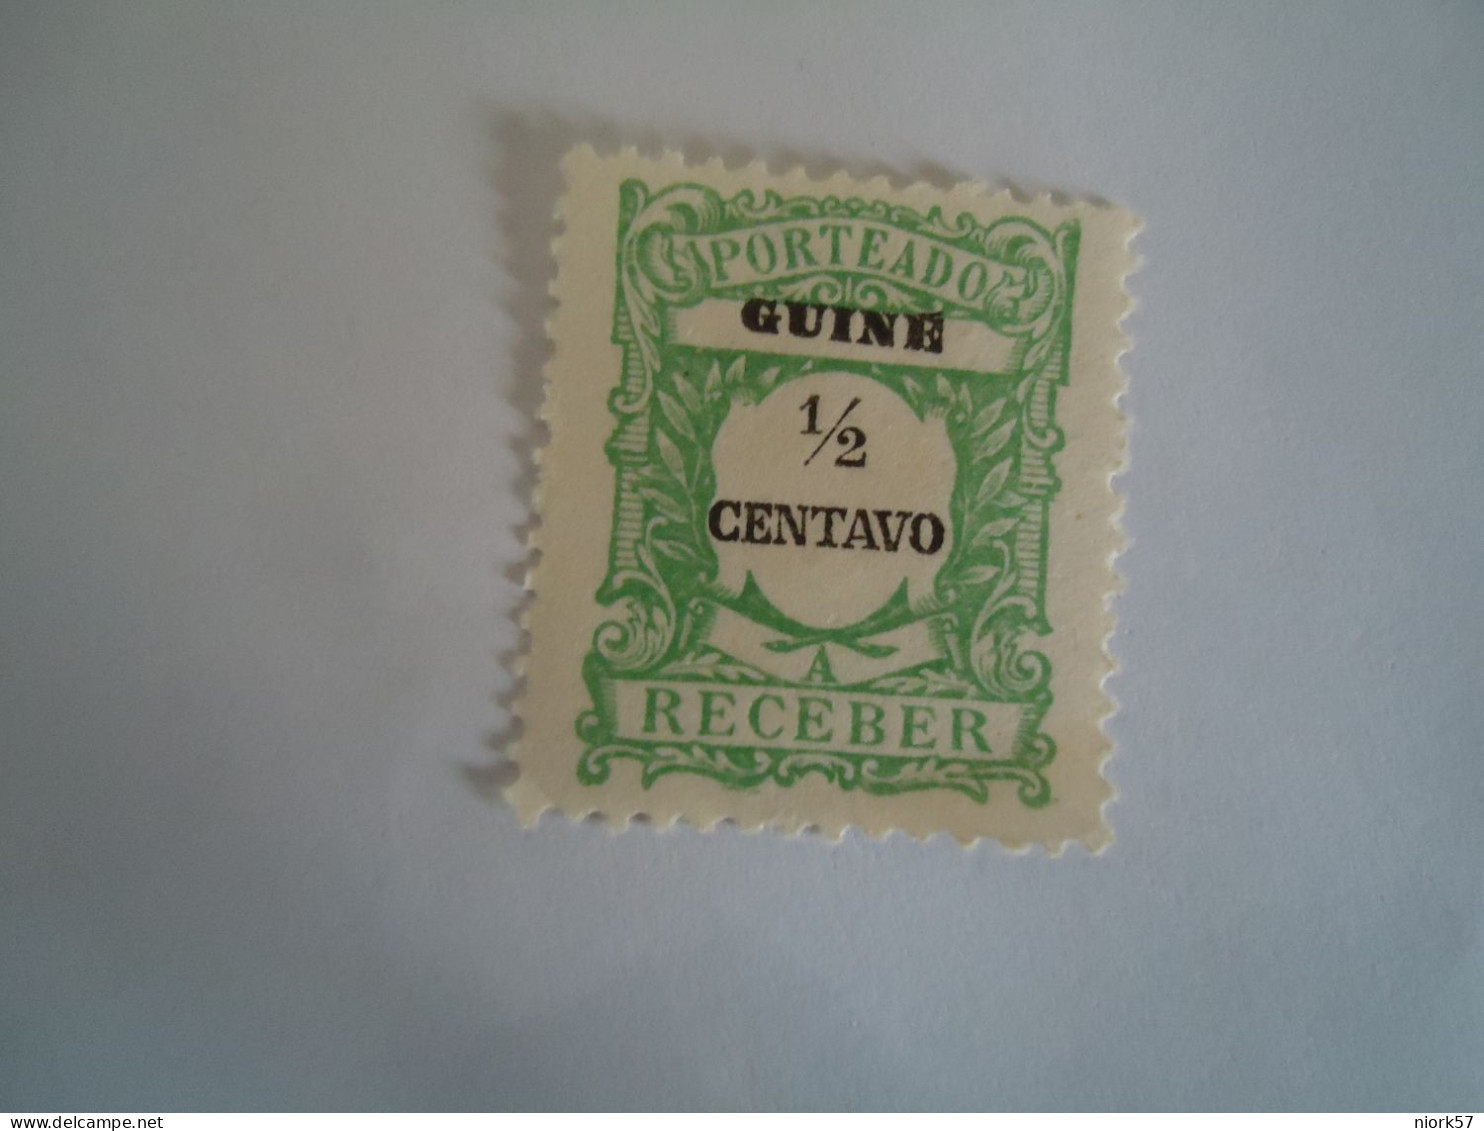 GUINEA PORTUGAL MLN STAMPS RESEDER - Portugees Guinea